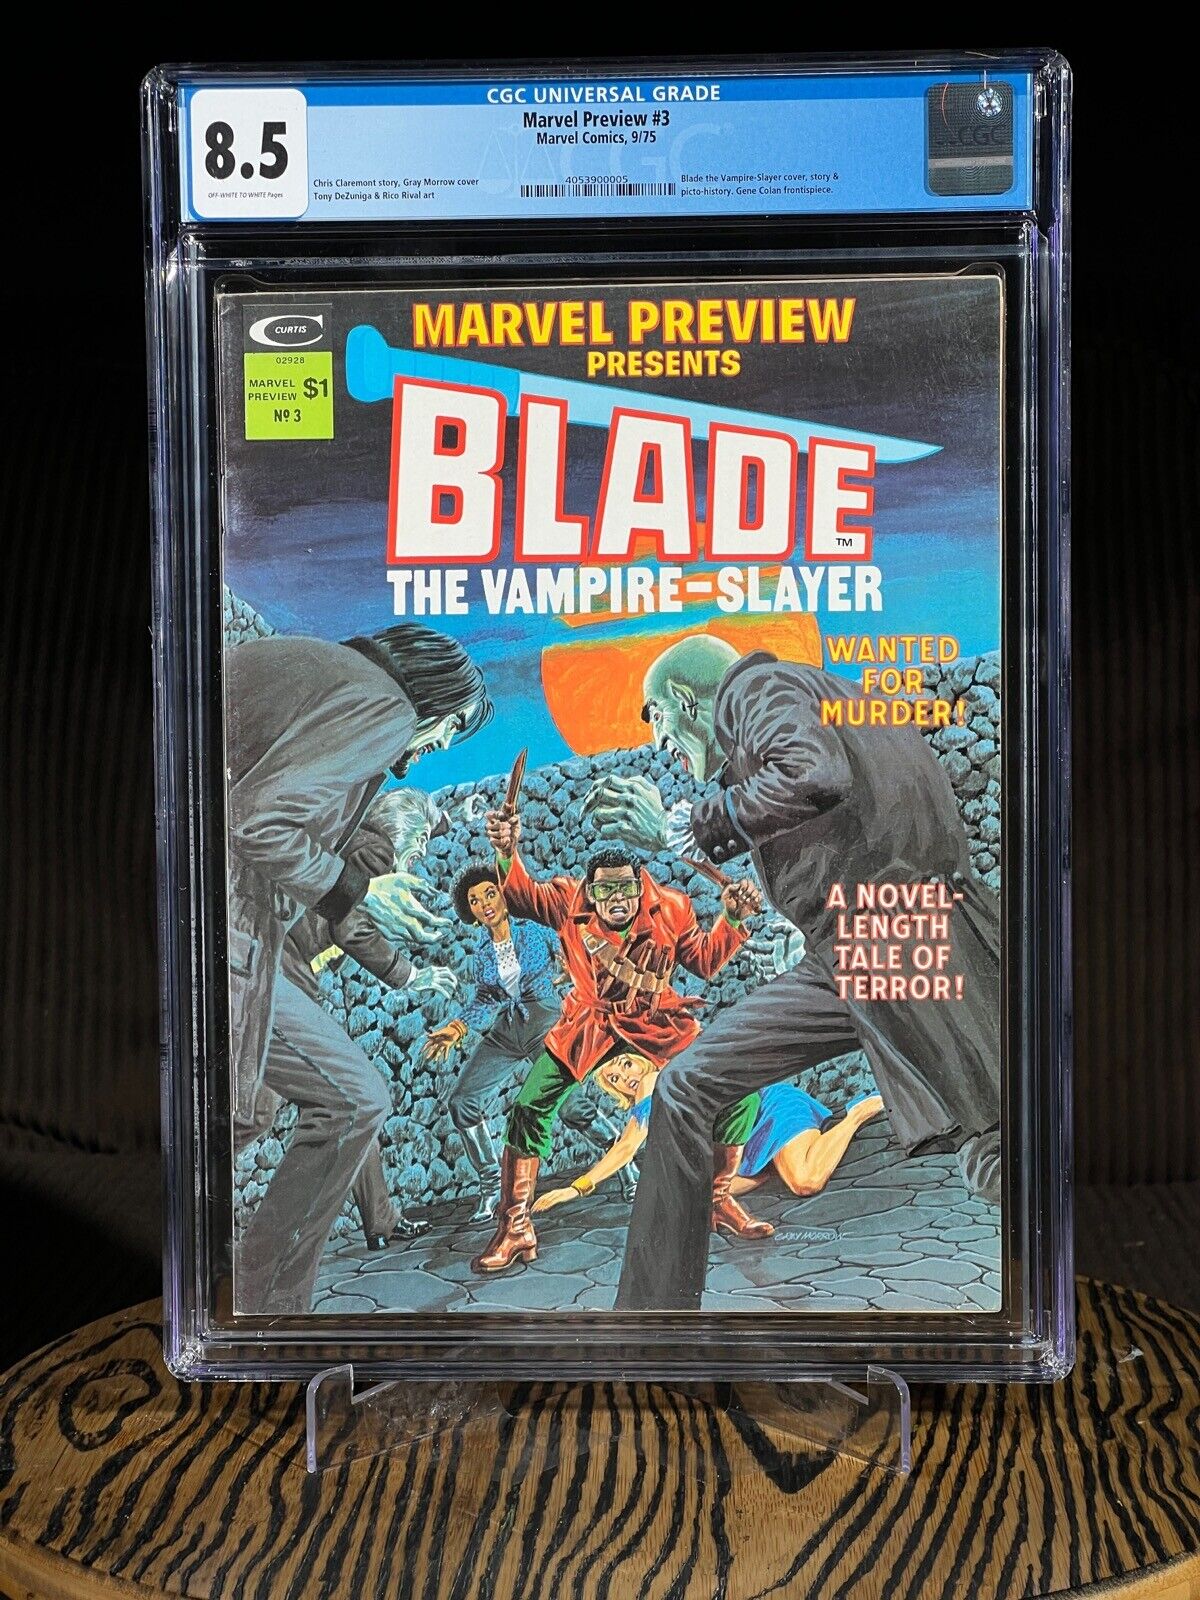 MARVEL PREVIEW #3 CGC 8.5 Presents BLADE Vampire Slayer 1975 Key 1st Appearance